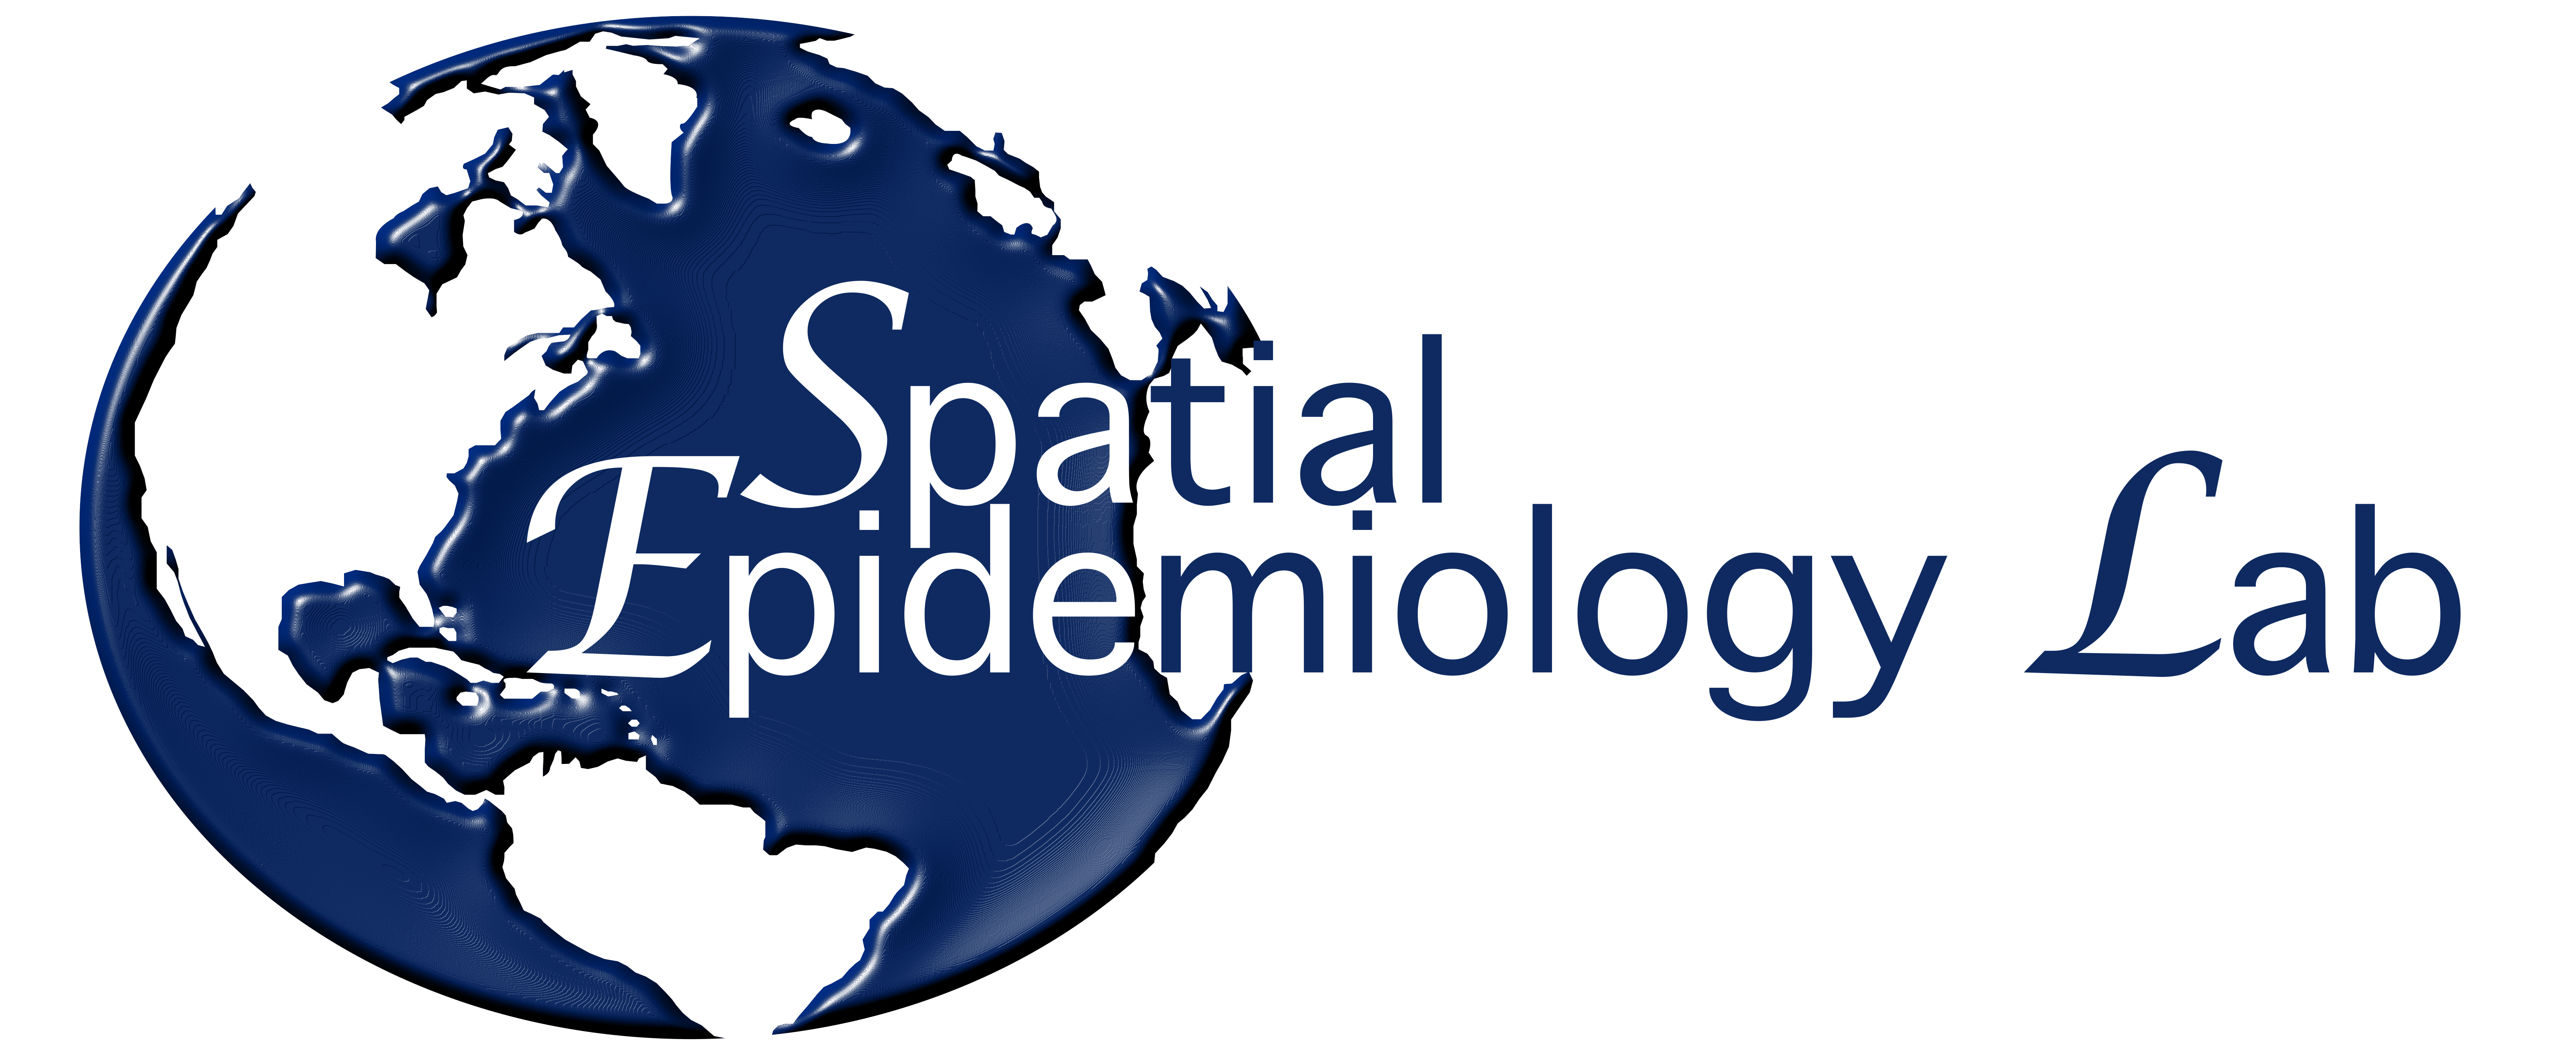 The Spatial Epidemiology Lab (SpatialEpi) is a medical geography and disease ecology research group based at the University of Queensland